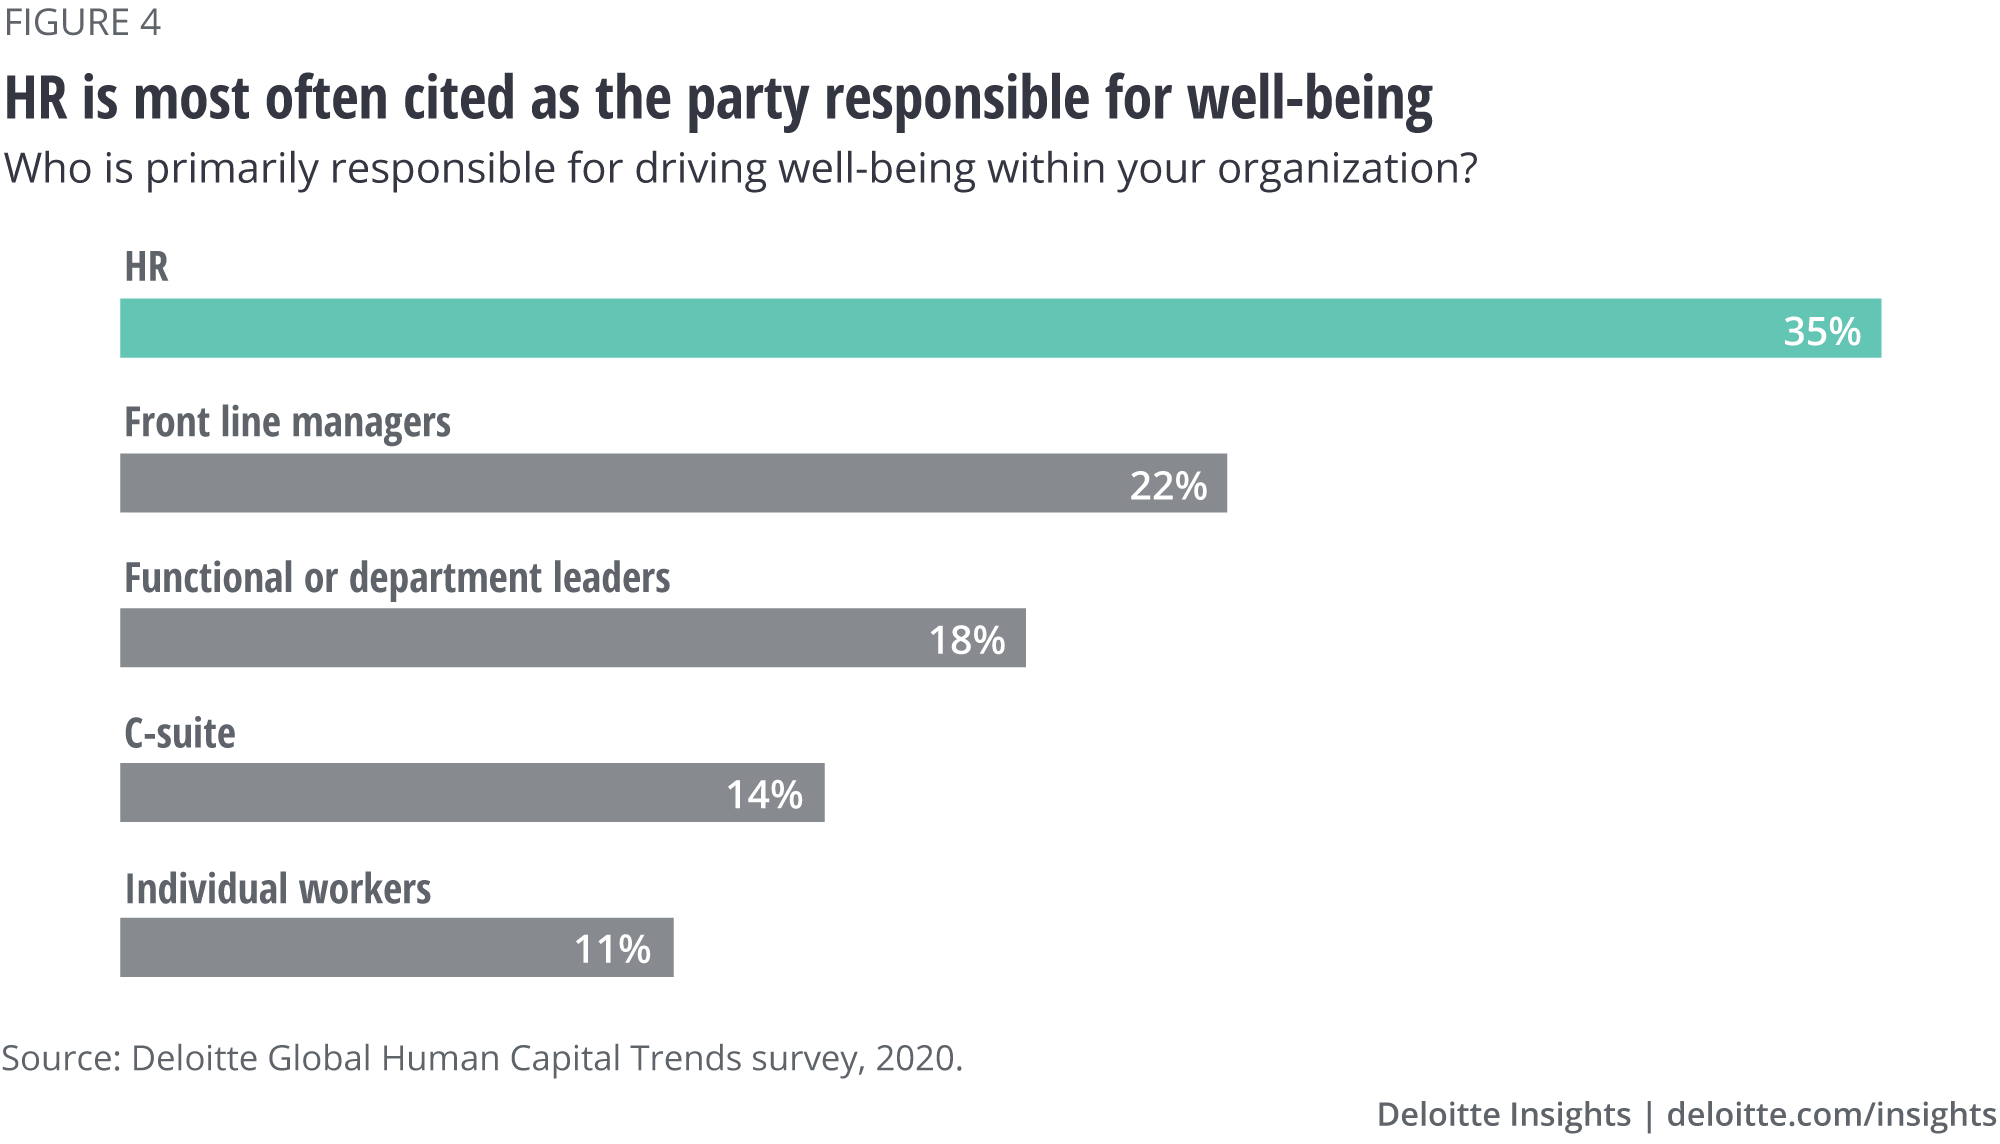 HR is most often cited as the party responsible for well-being